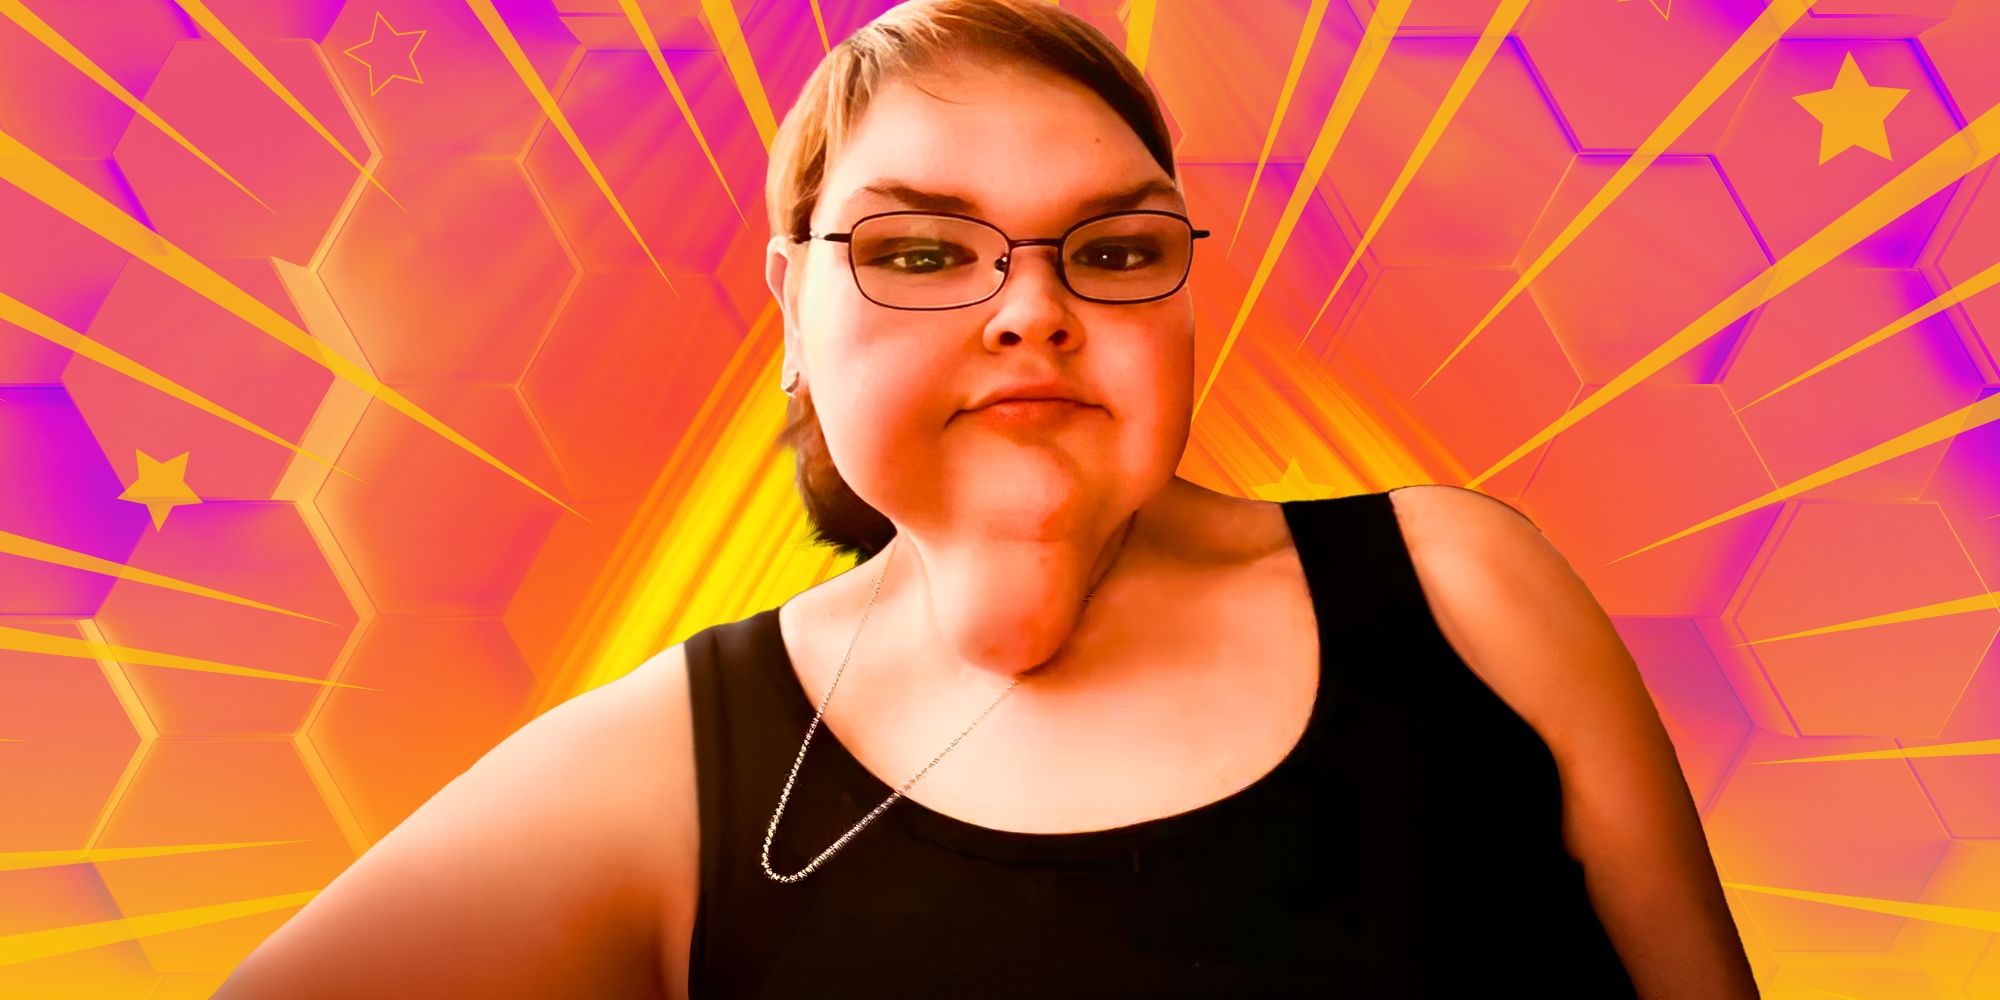  1000-Lb Sisters' Tammy  sleeveless in black top and glasses